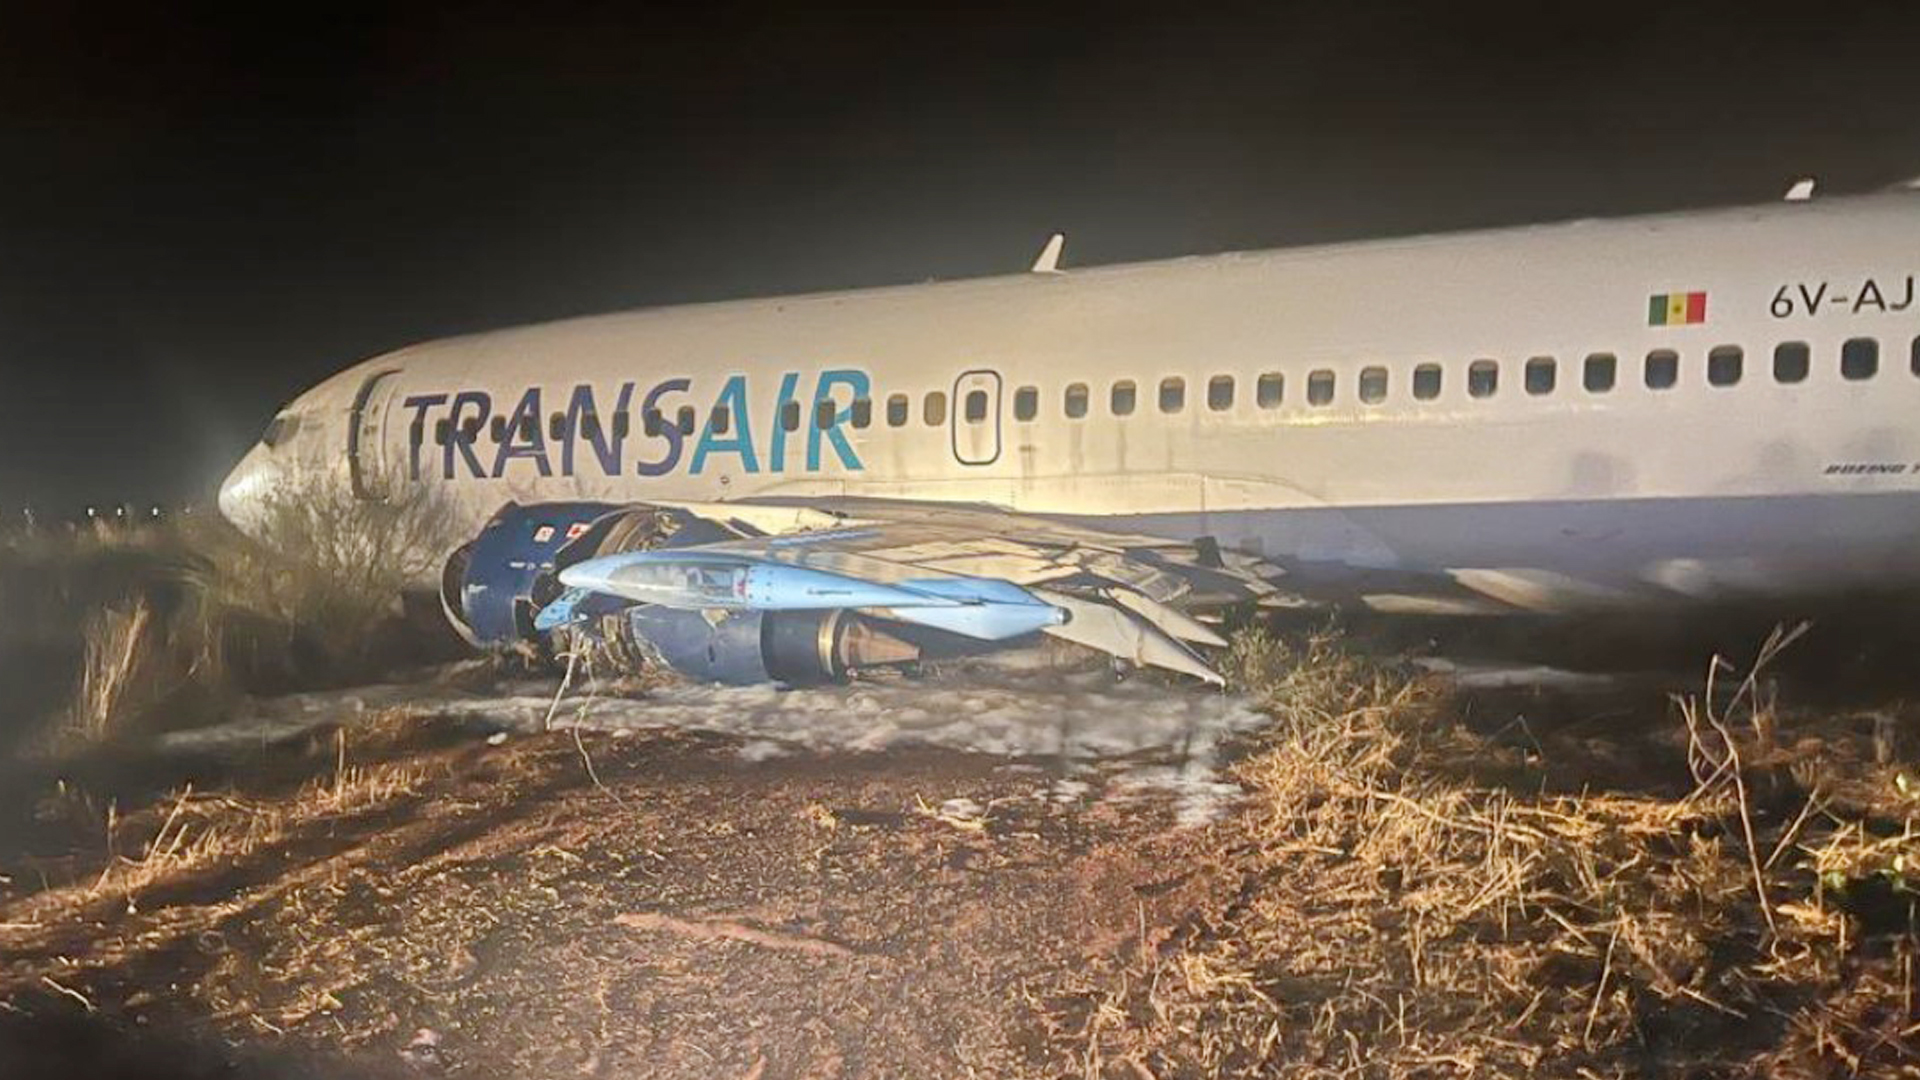 Another Boeing mishap as 737 with 78 onboard skids off runway & wing bursts into flames at Senegal’s Dakar airport [Video]